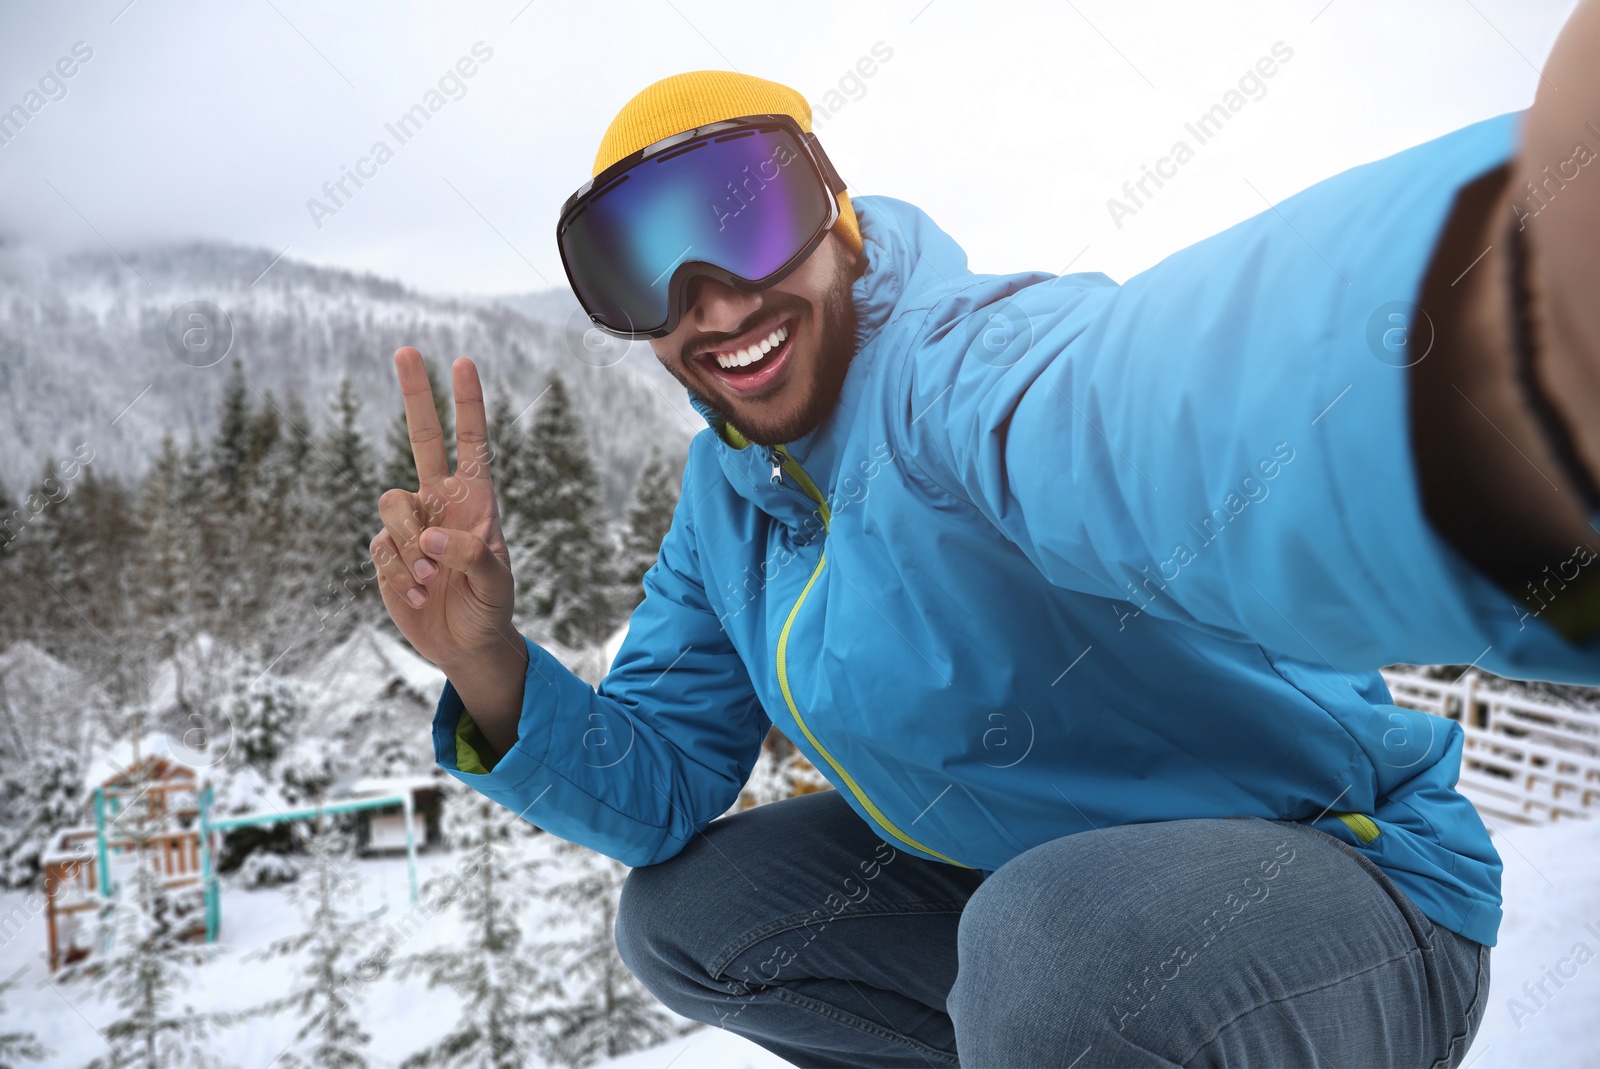 Image of Smiling young man in ski goggles taking selfie and showing peace sign in mountains